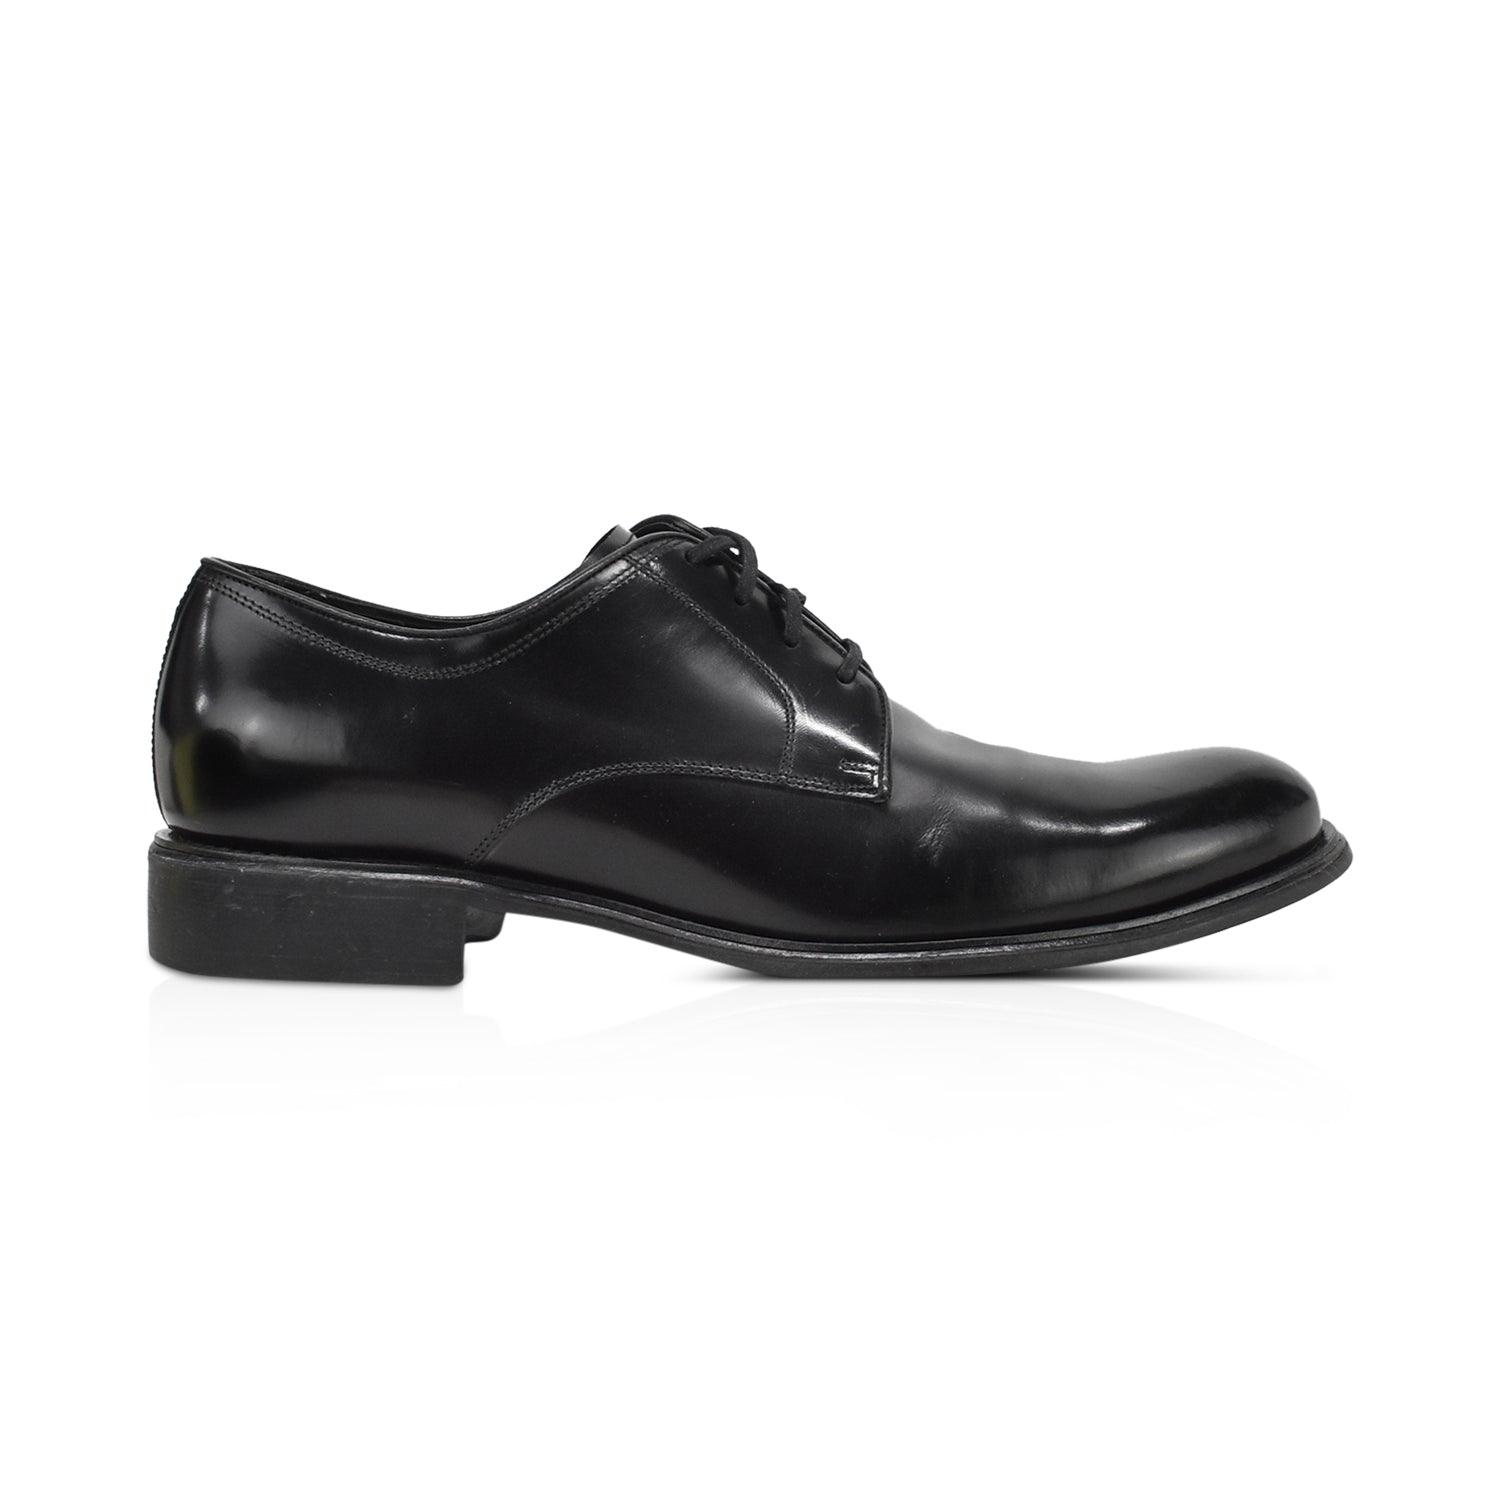 Dolce & Gabbana Dress Shoes - Men's 8 - Fashionably Yours